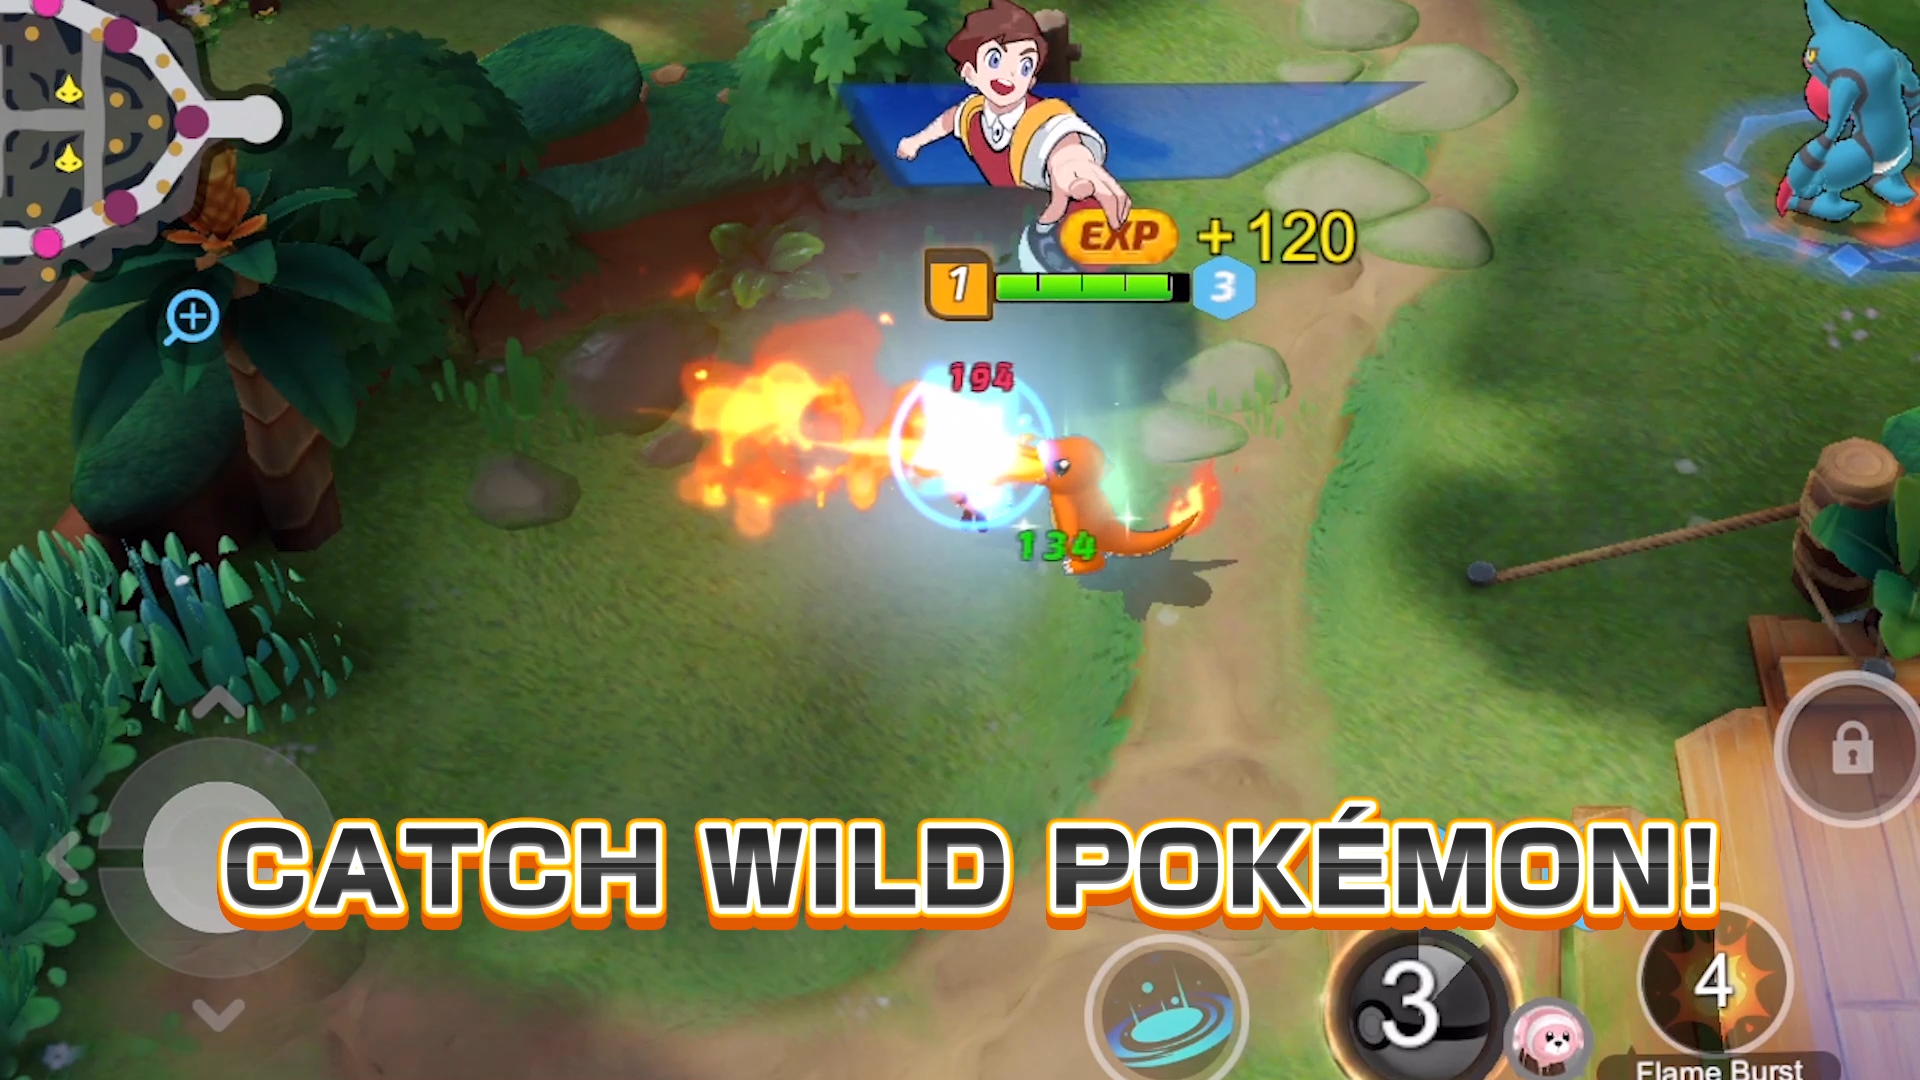 Pokémon Unite's “pay to win” mechanics are upsetting some players